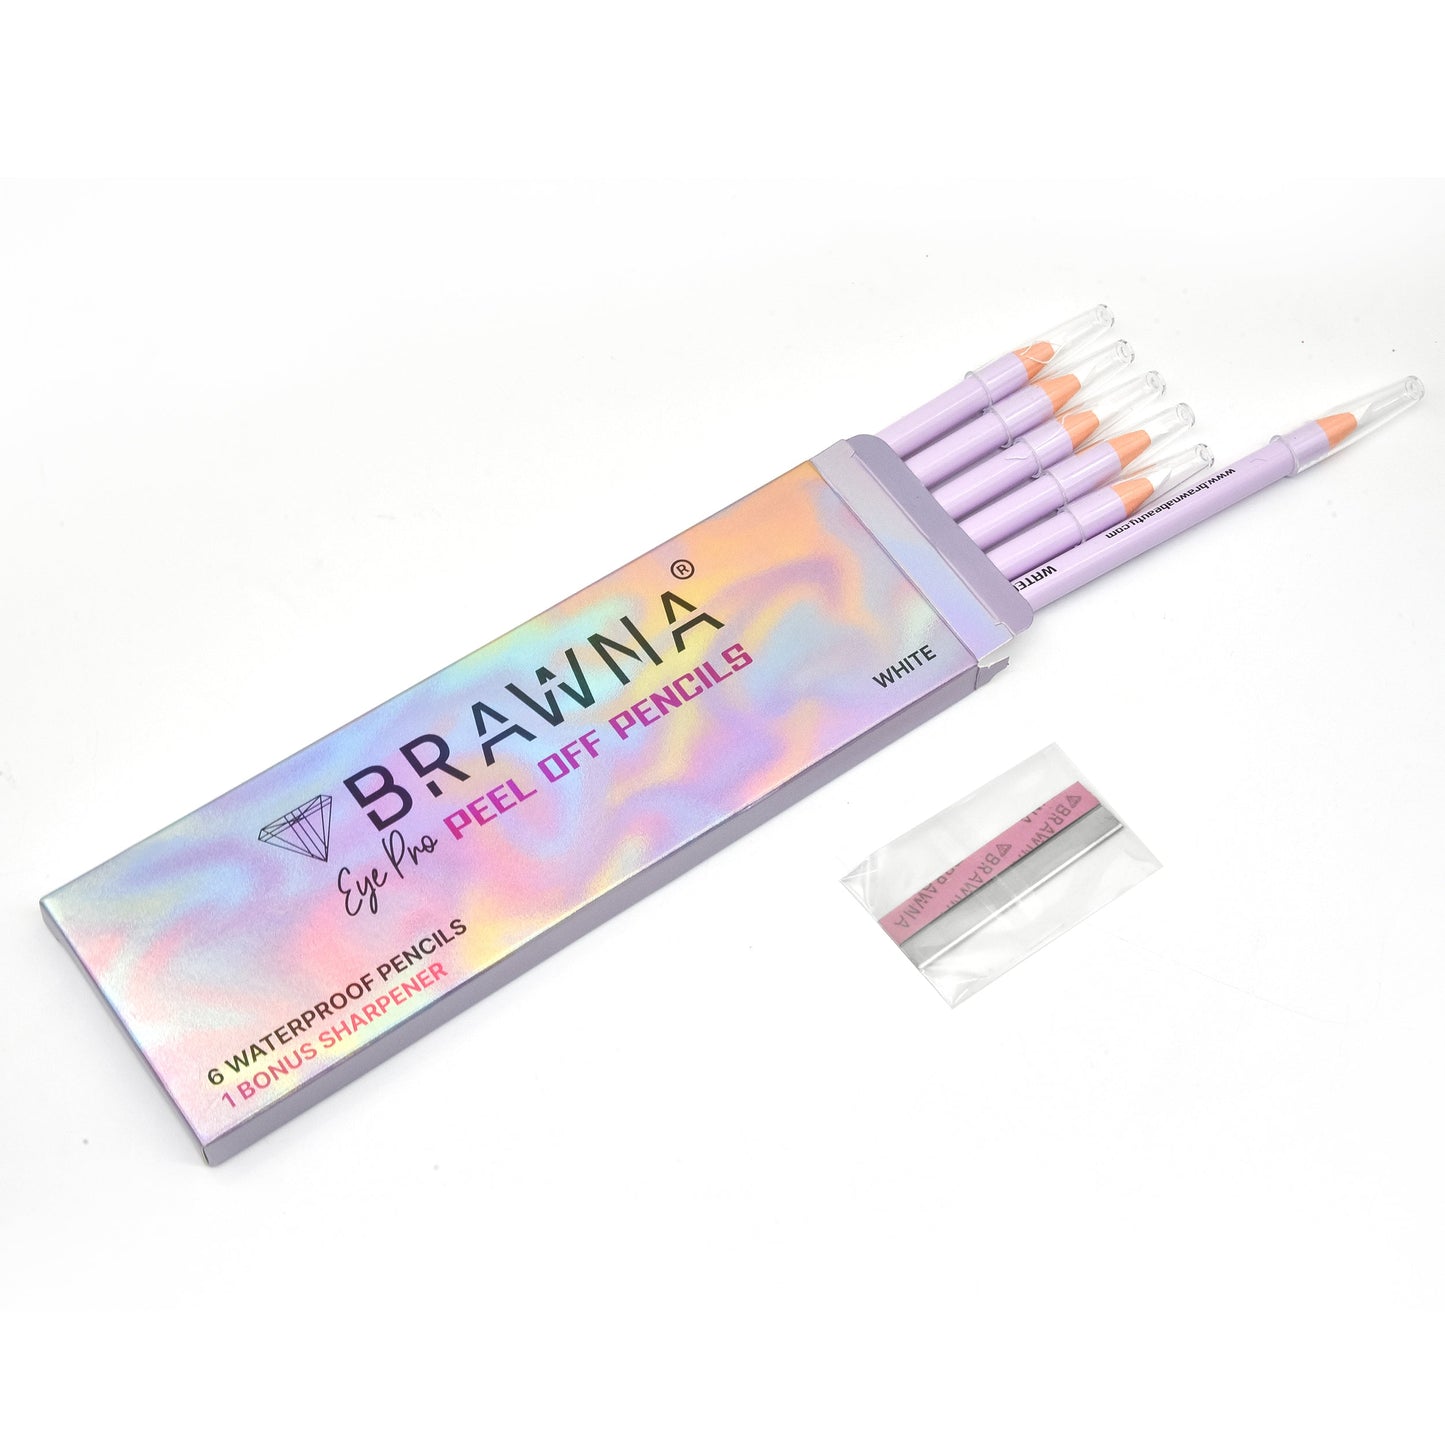 Brawna - Brow Pro Peel Off Pencils For Lips & Eyebrow Mapping - 1 pen